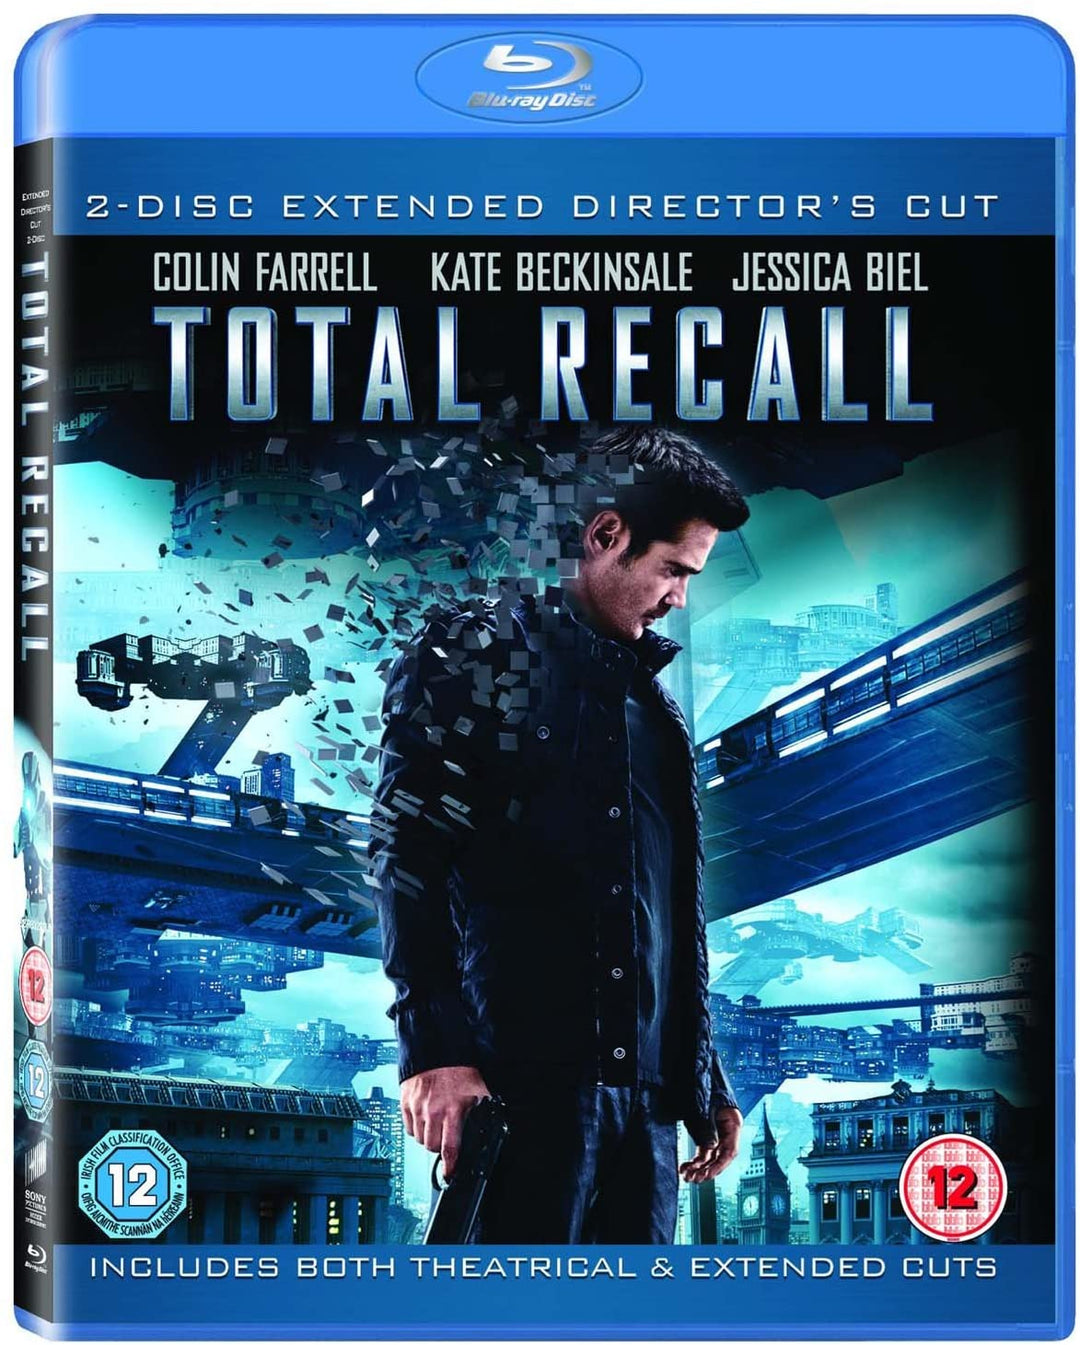 Total Recall [2012] [Region Free] – Action/Science-Fiction [Blu-ray]